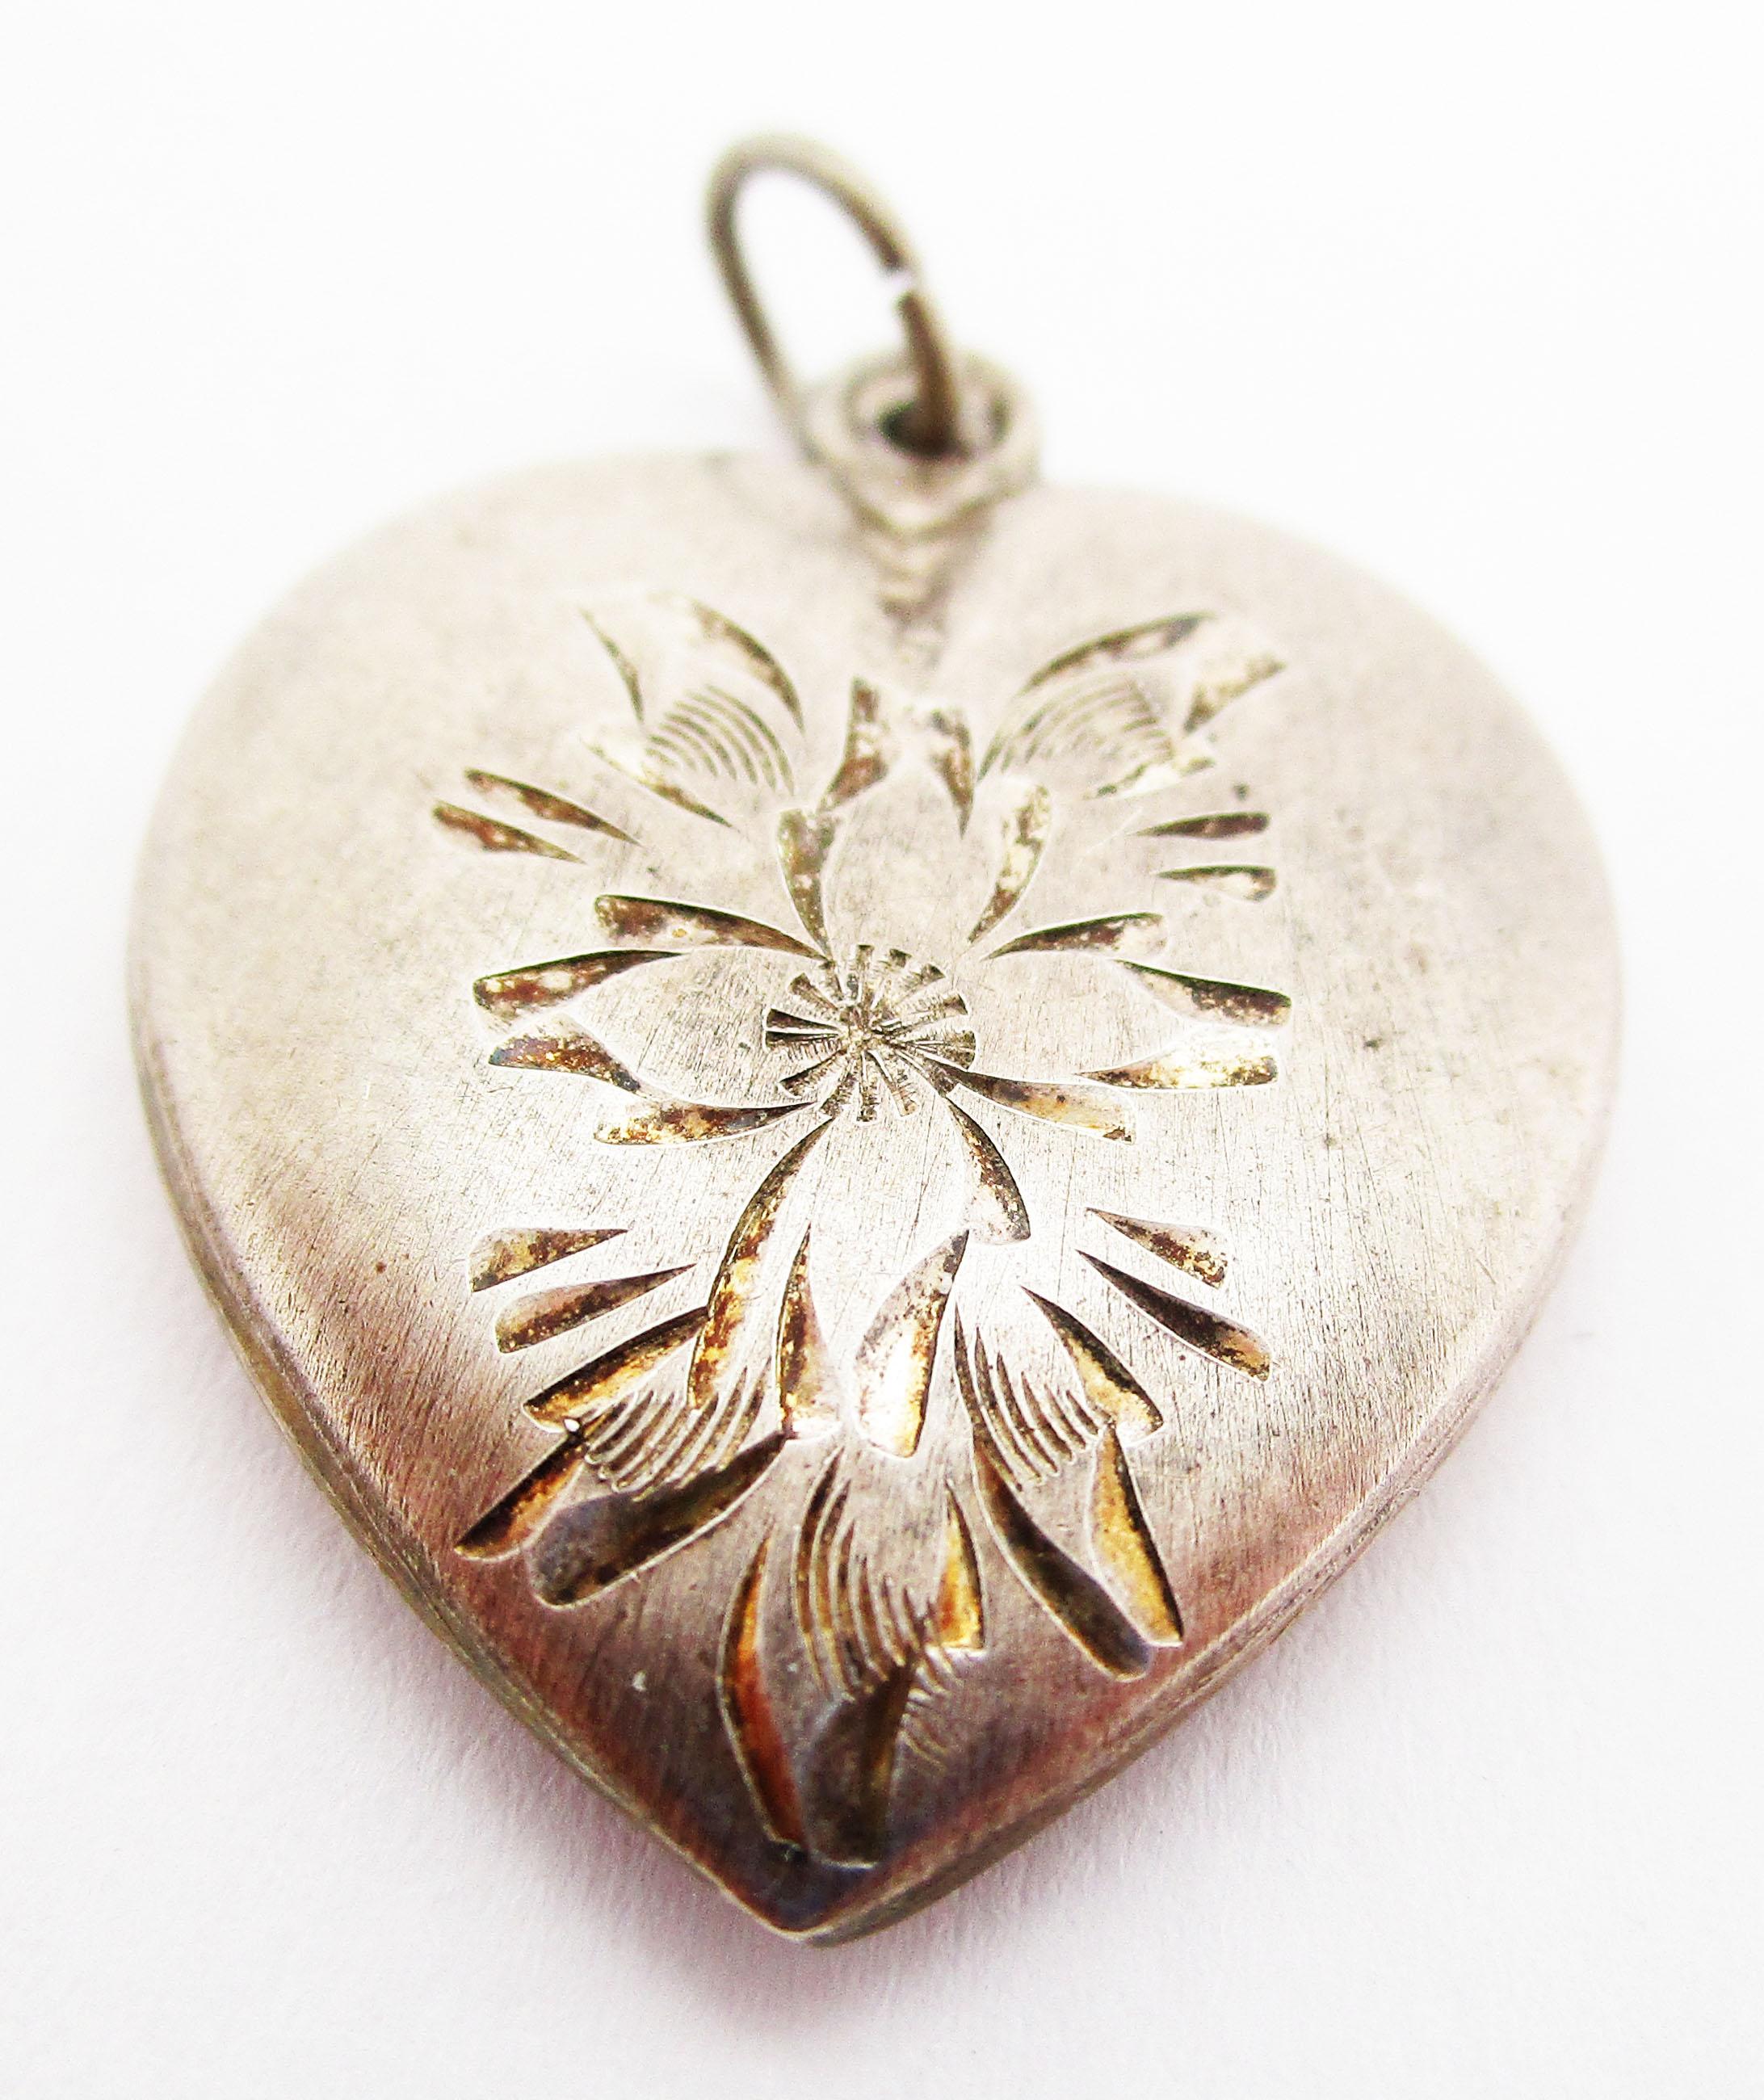 This adorable sterling silver puff heart has a gorgeous engraved Art Deco design and would be an elegant pendant or a lovely charm! The puff heart is a classic element of the must have wardrobe, and this charm in particular is a perfect example! The